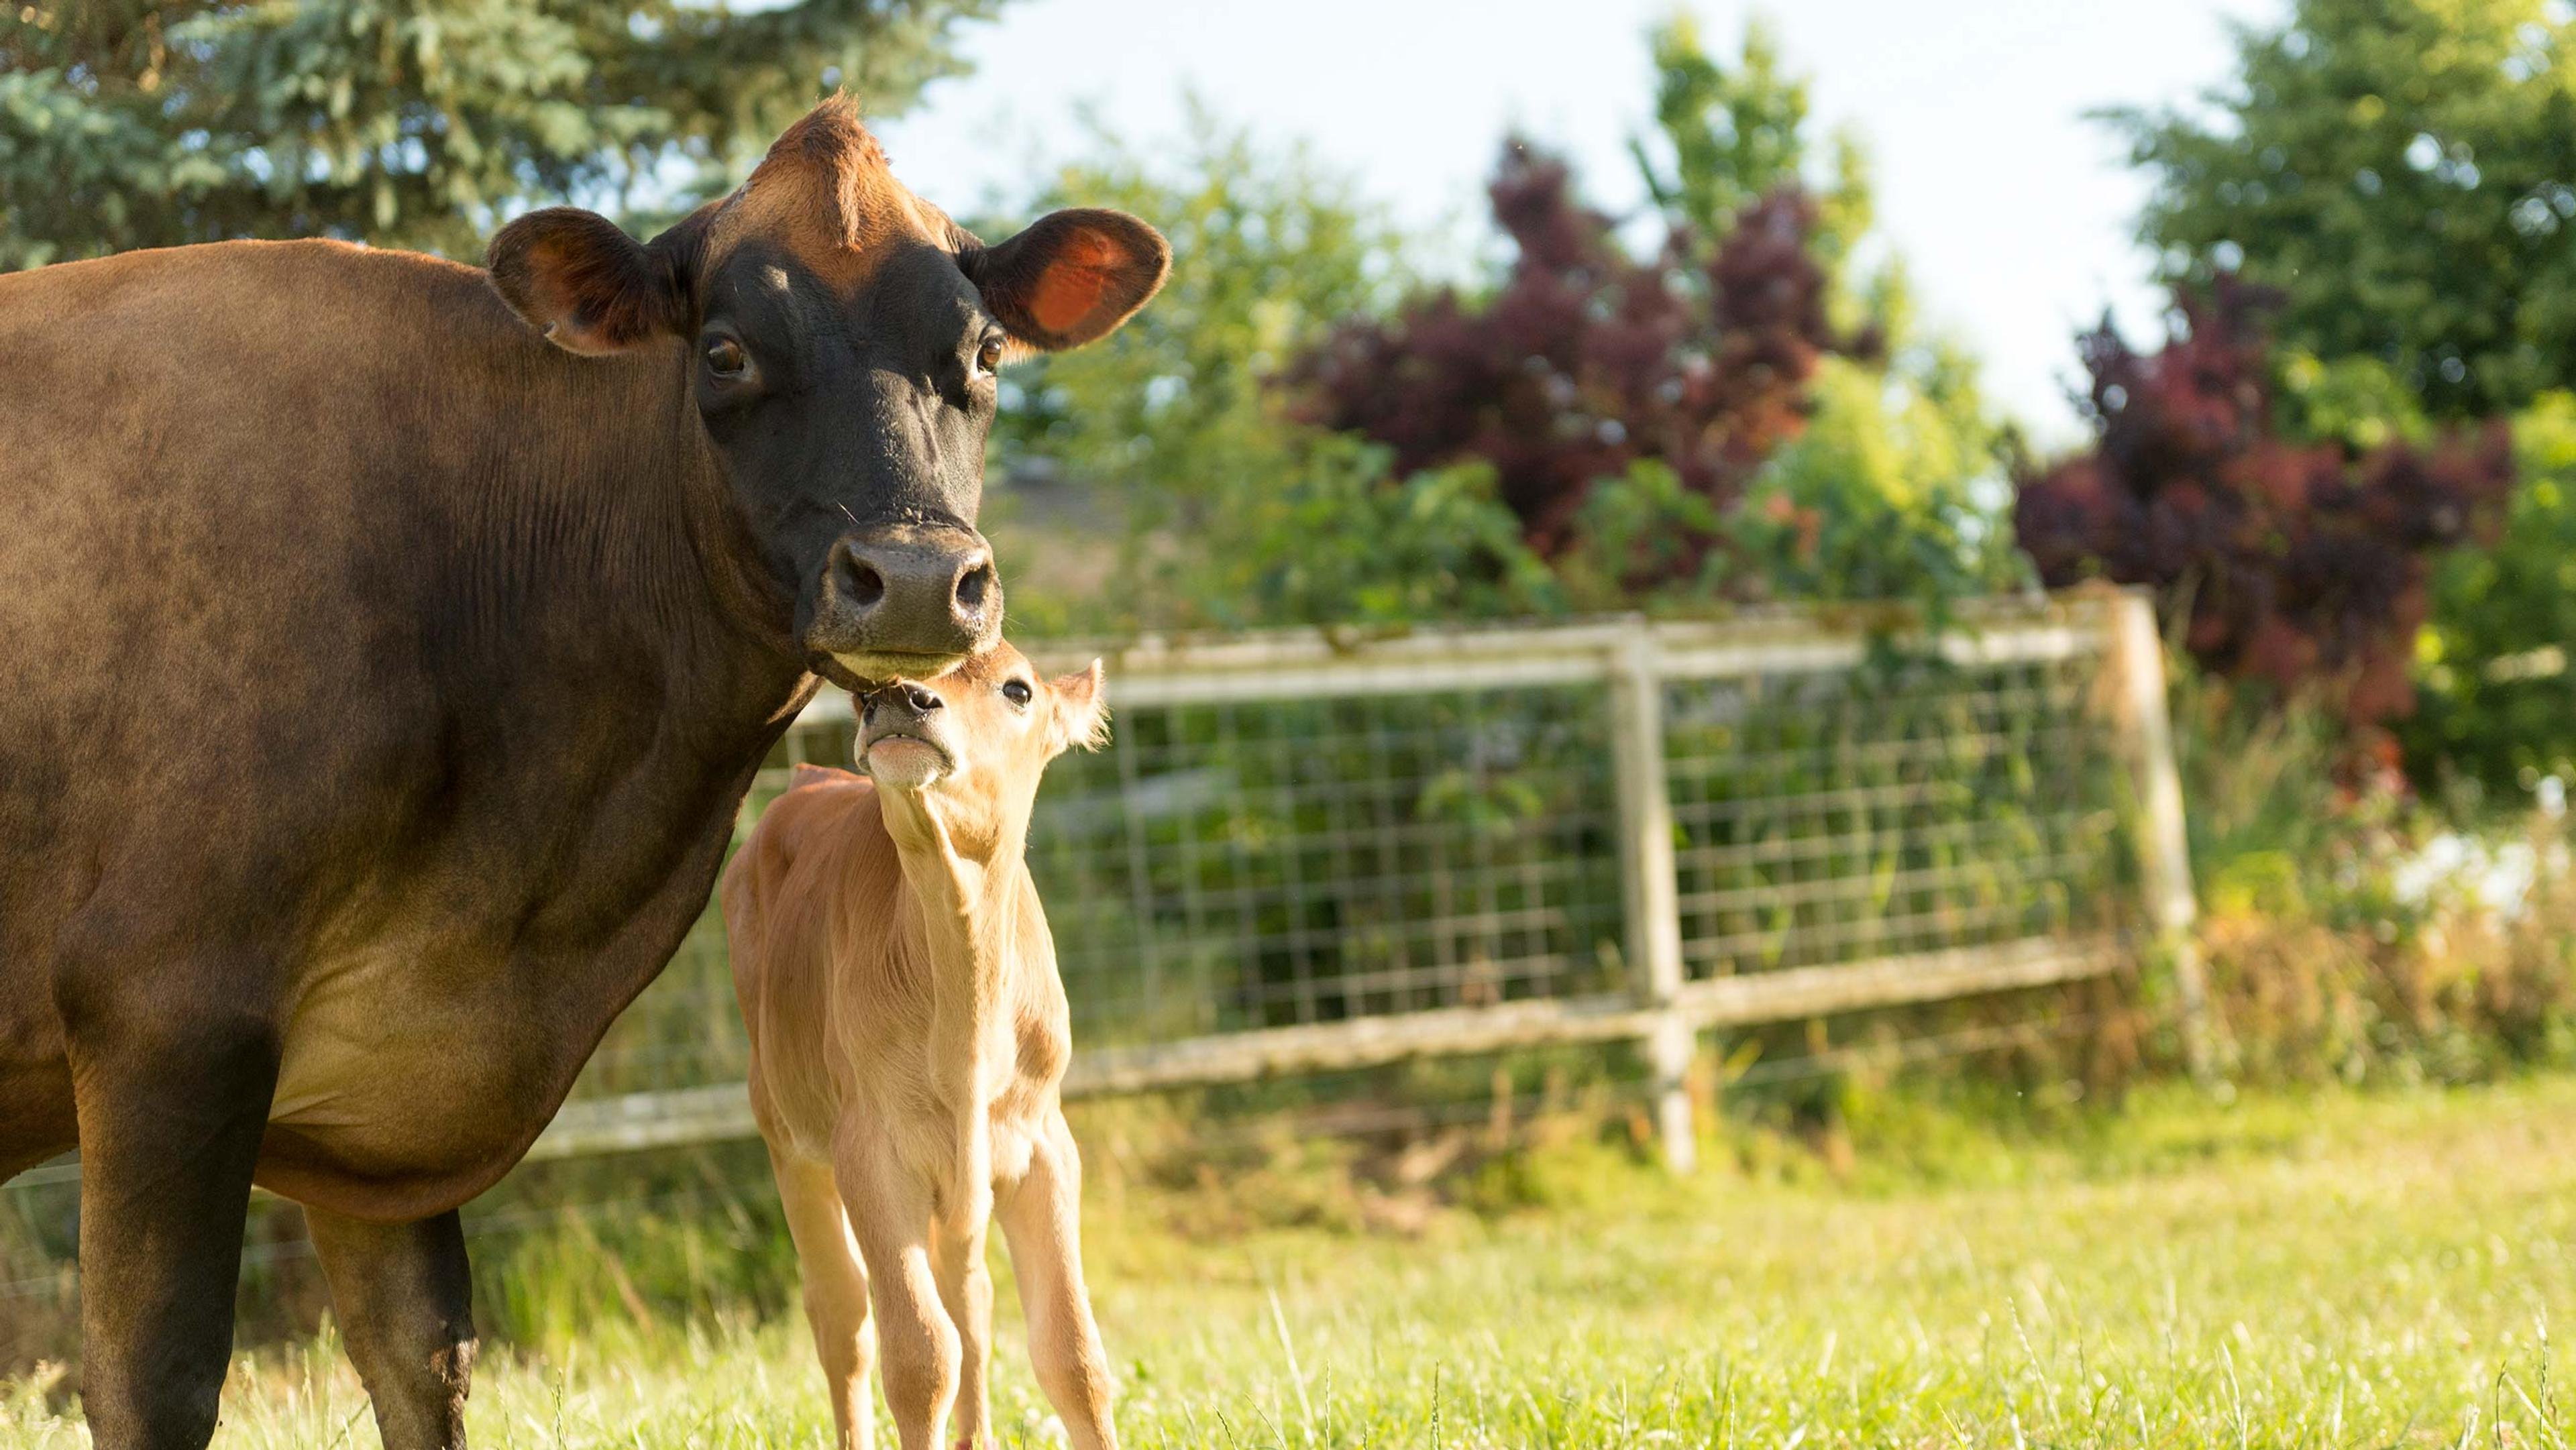 A cow and a calf standing on a farm.